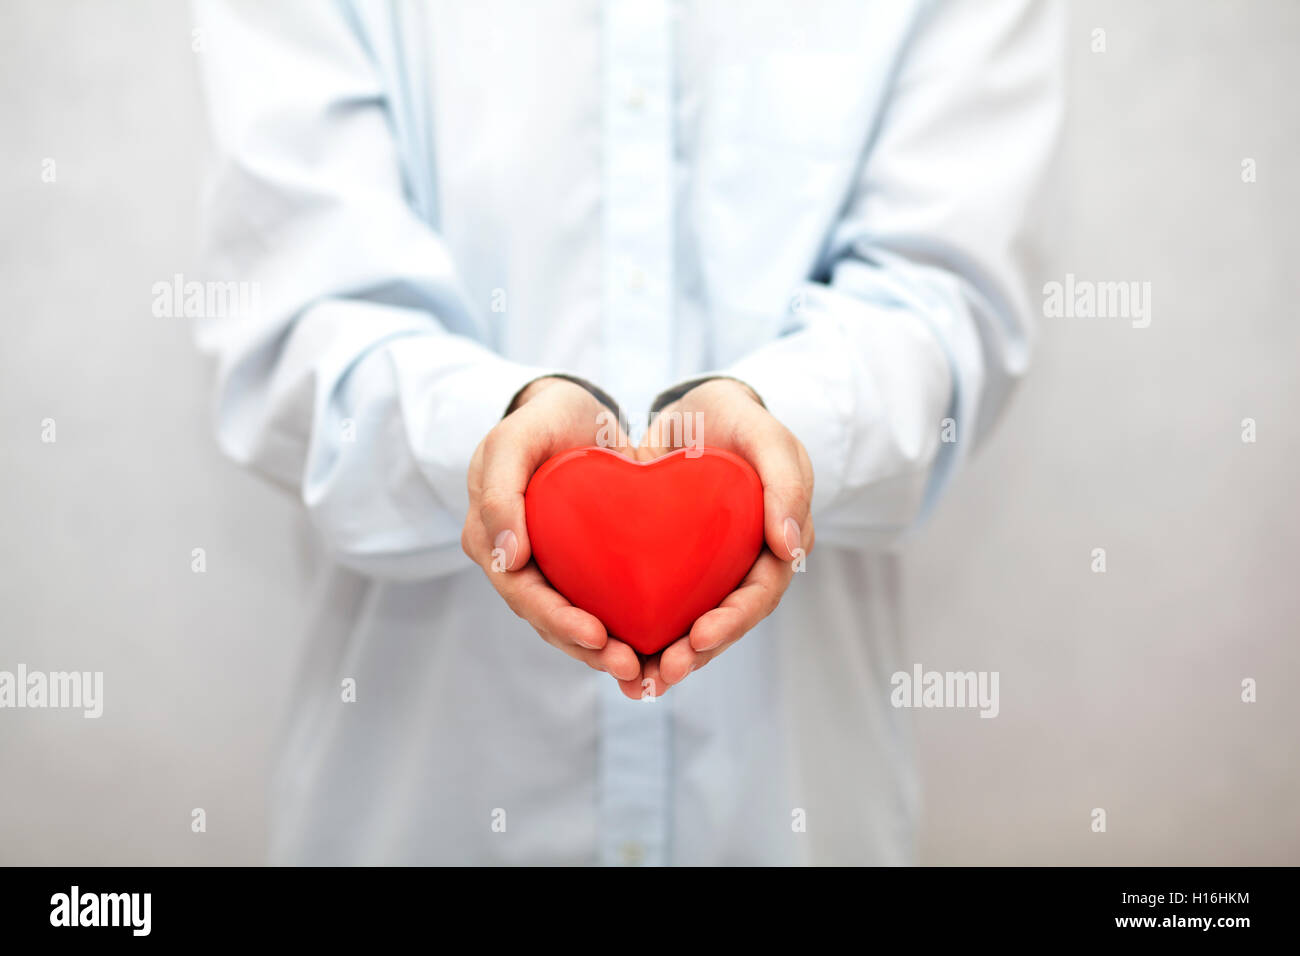 Red heart in hands Stock Photo